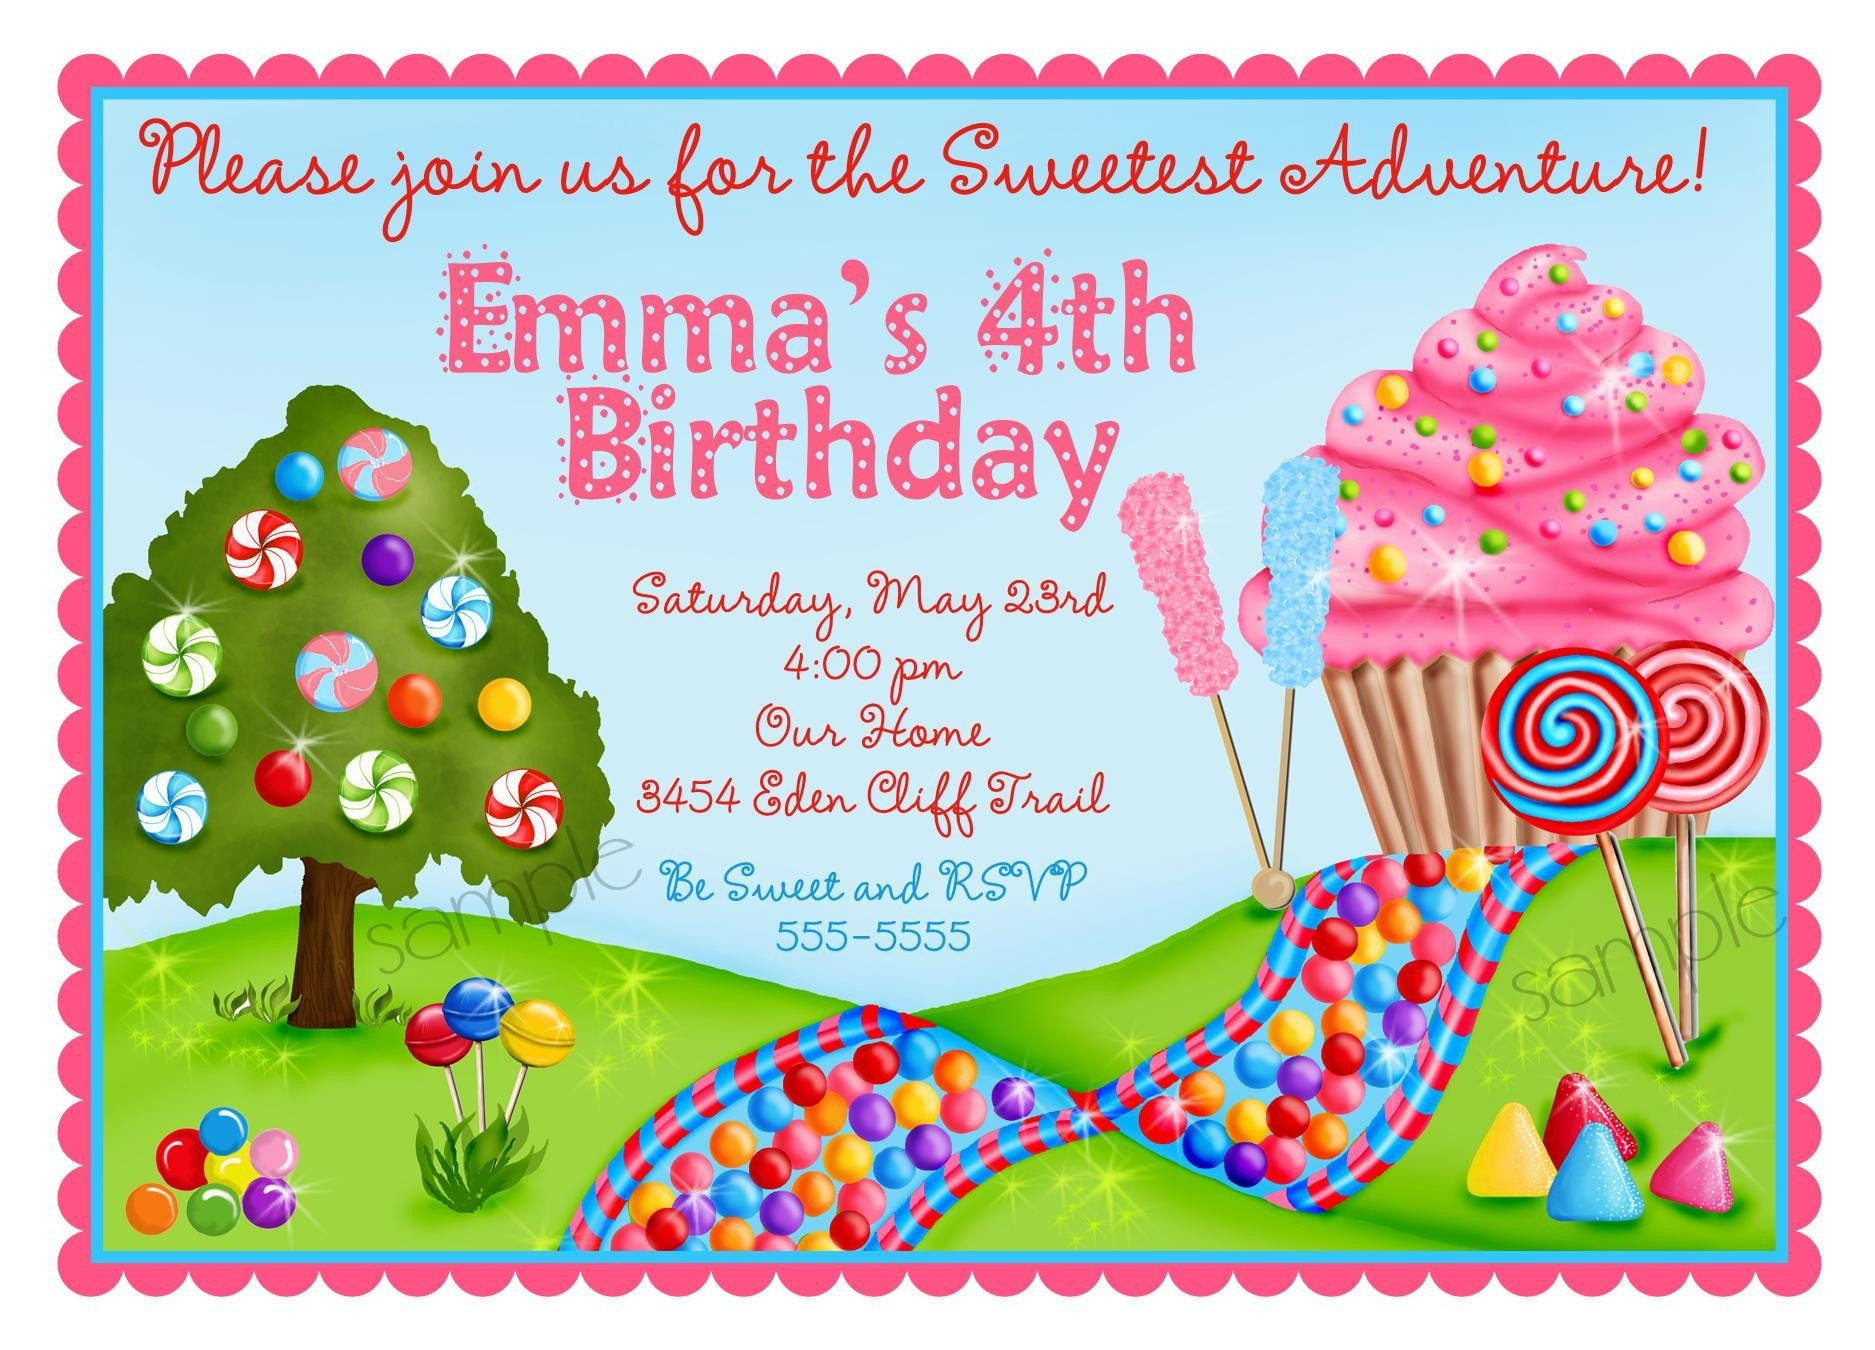 Candyland Birthday Party Invitations
 Personalized Invitations Oh Sweet Candy by LittlebeaneBoutique